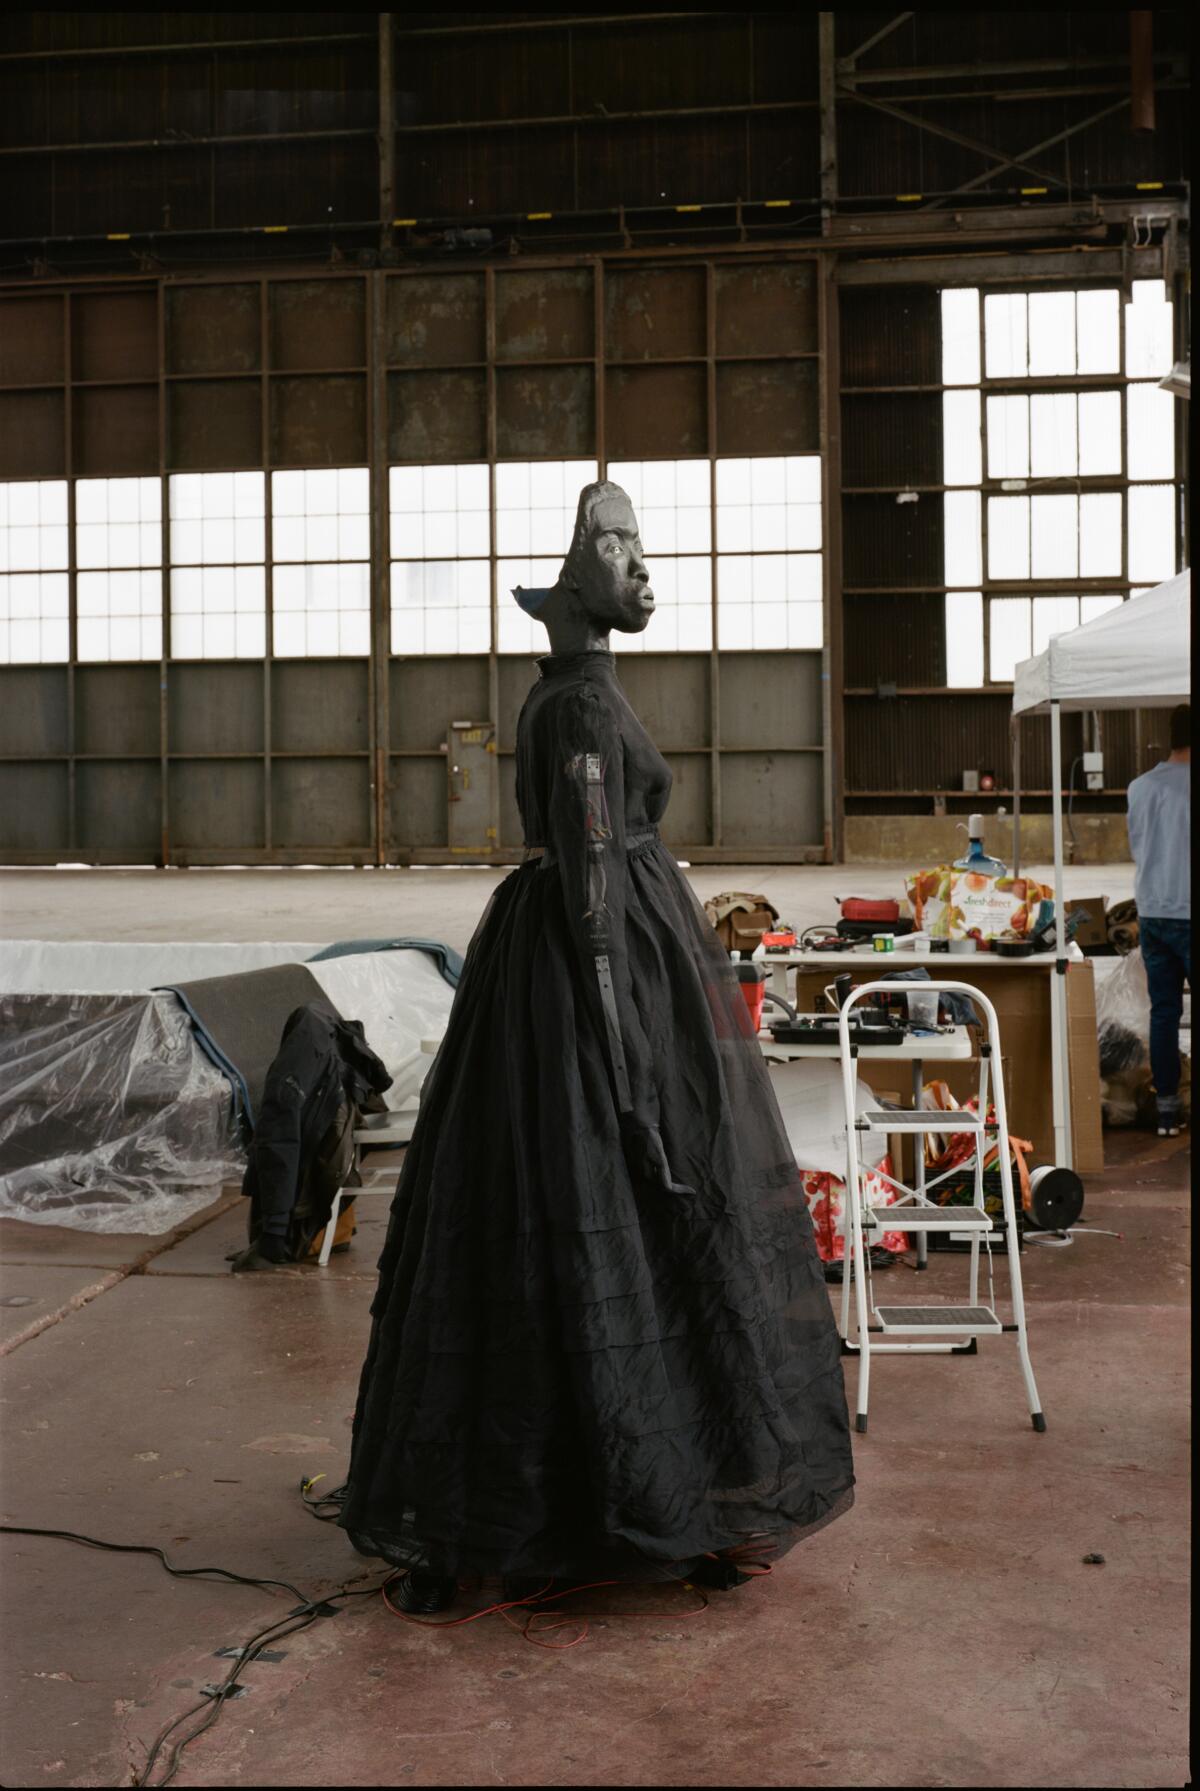 A Black mask-like face connects to a life-size female figure in a black dress, part of an in-progress installation.    